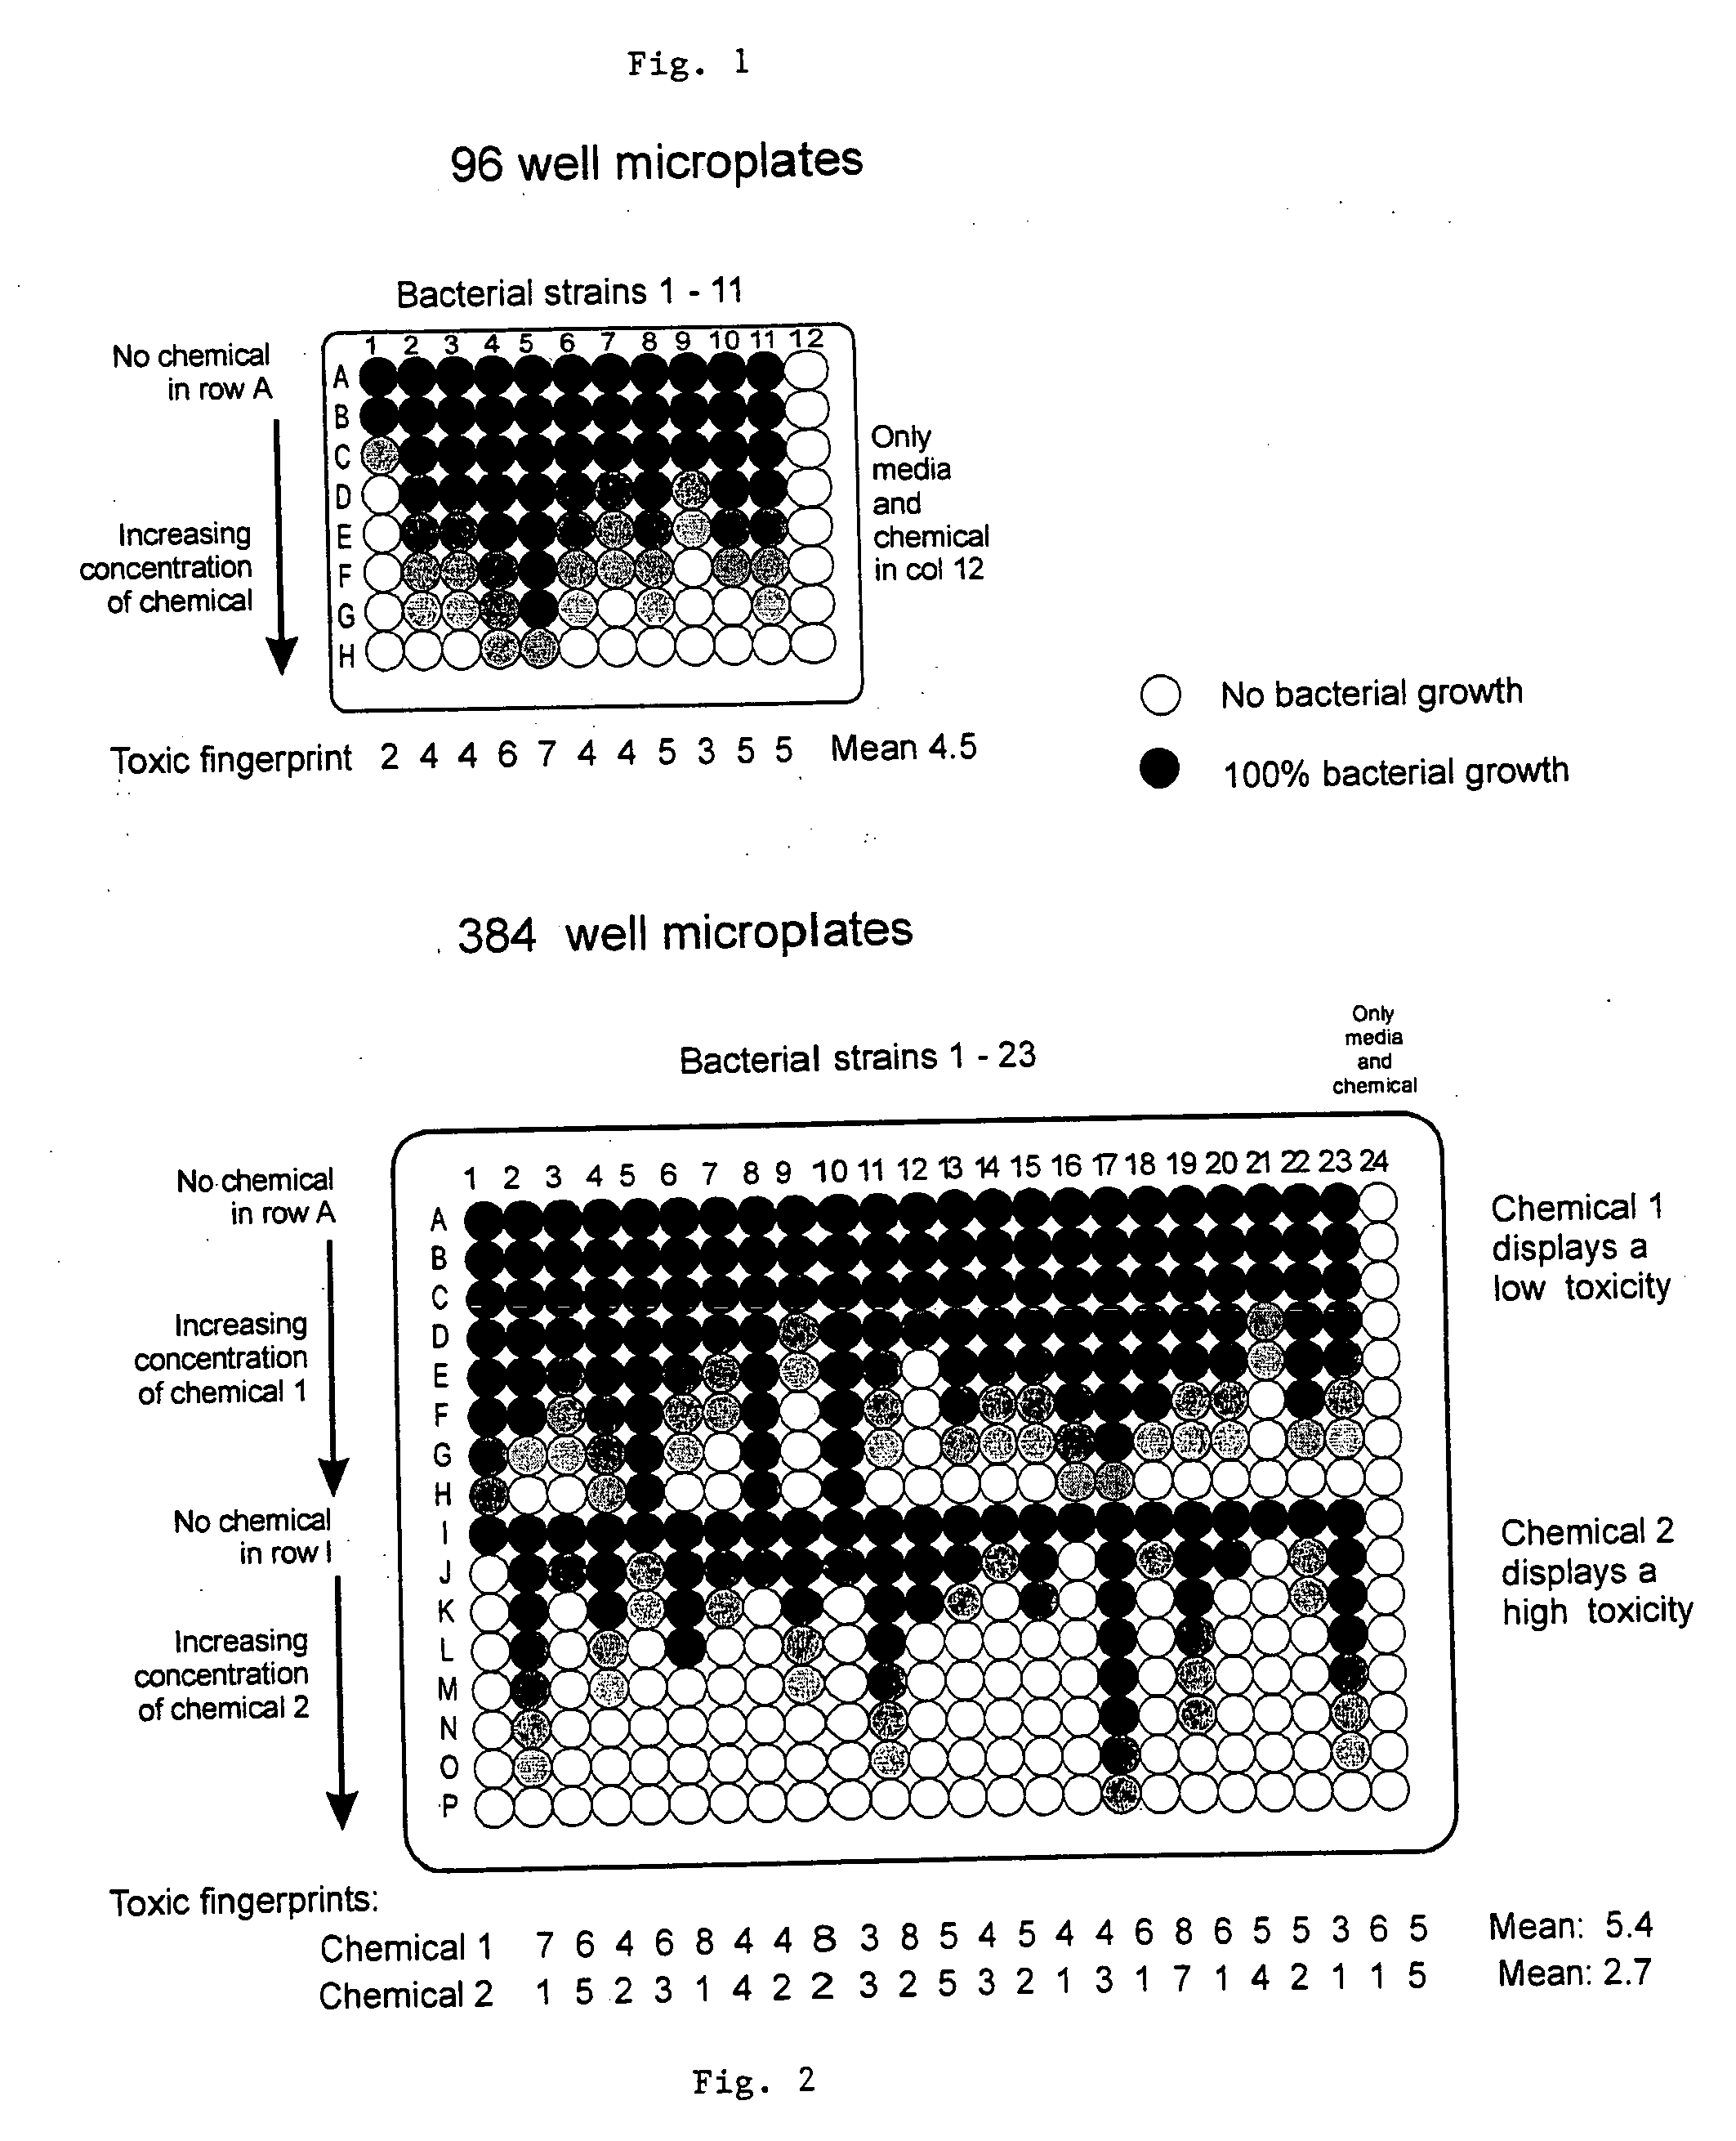 Method and device